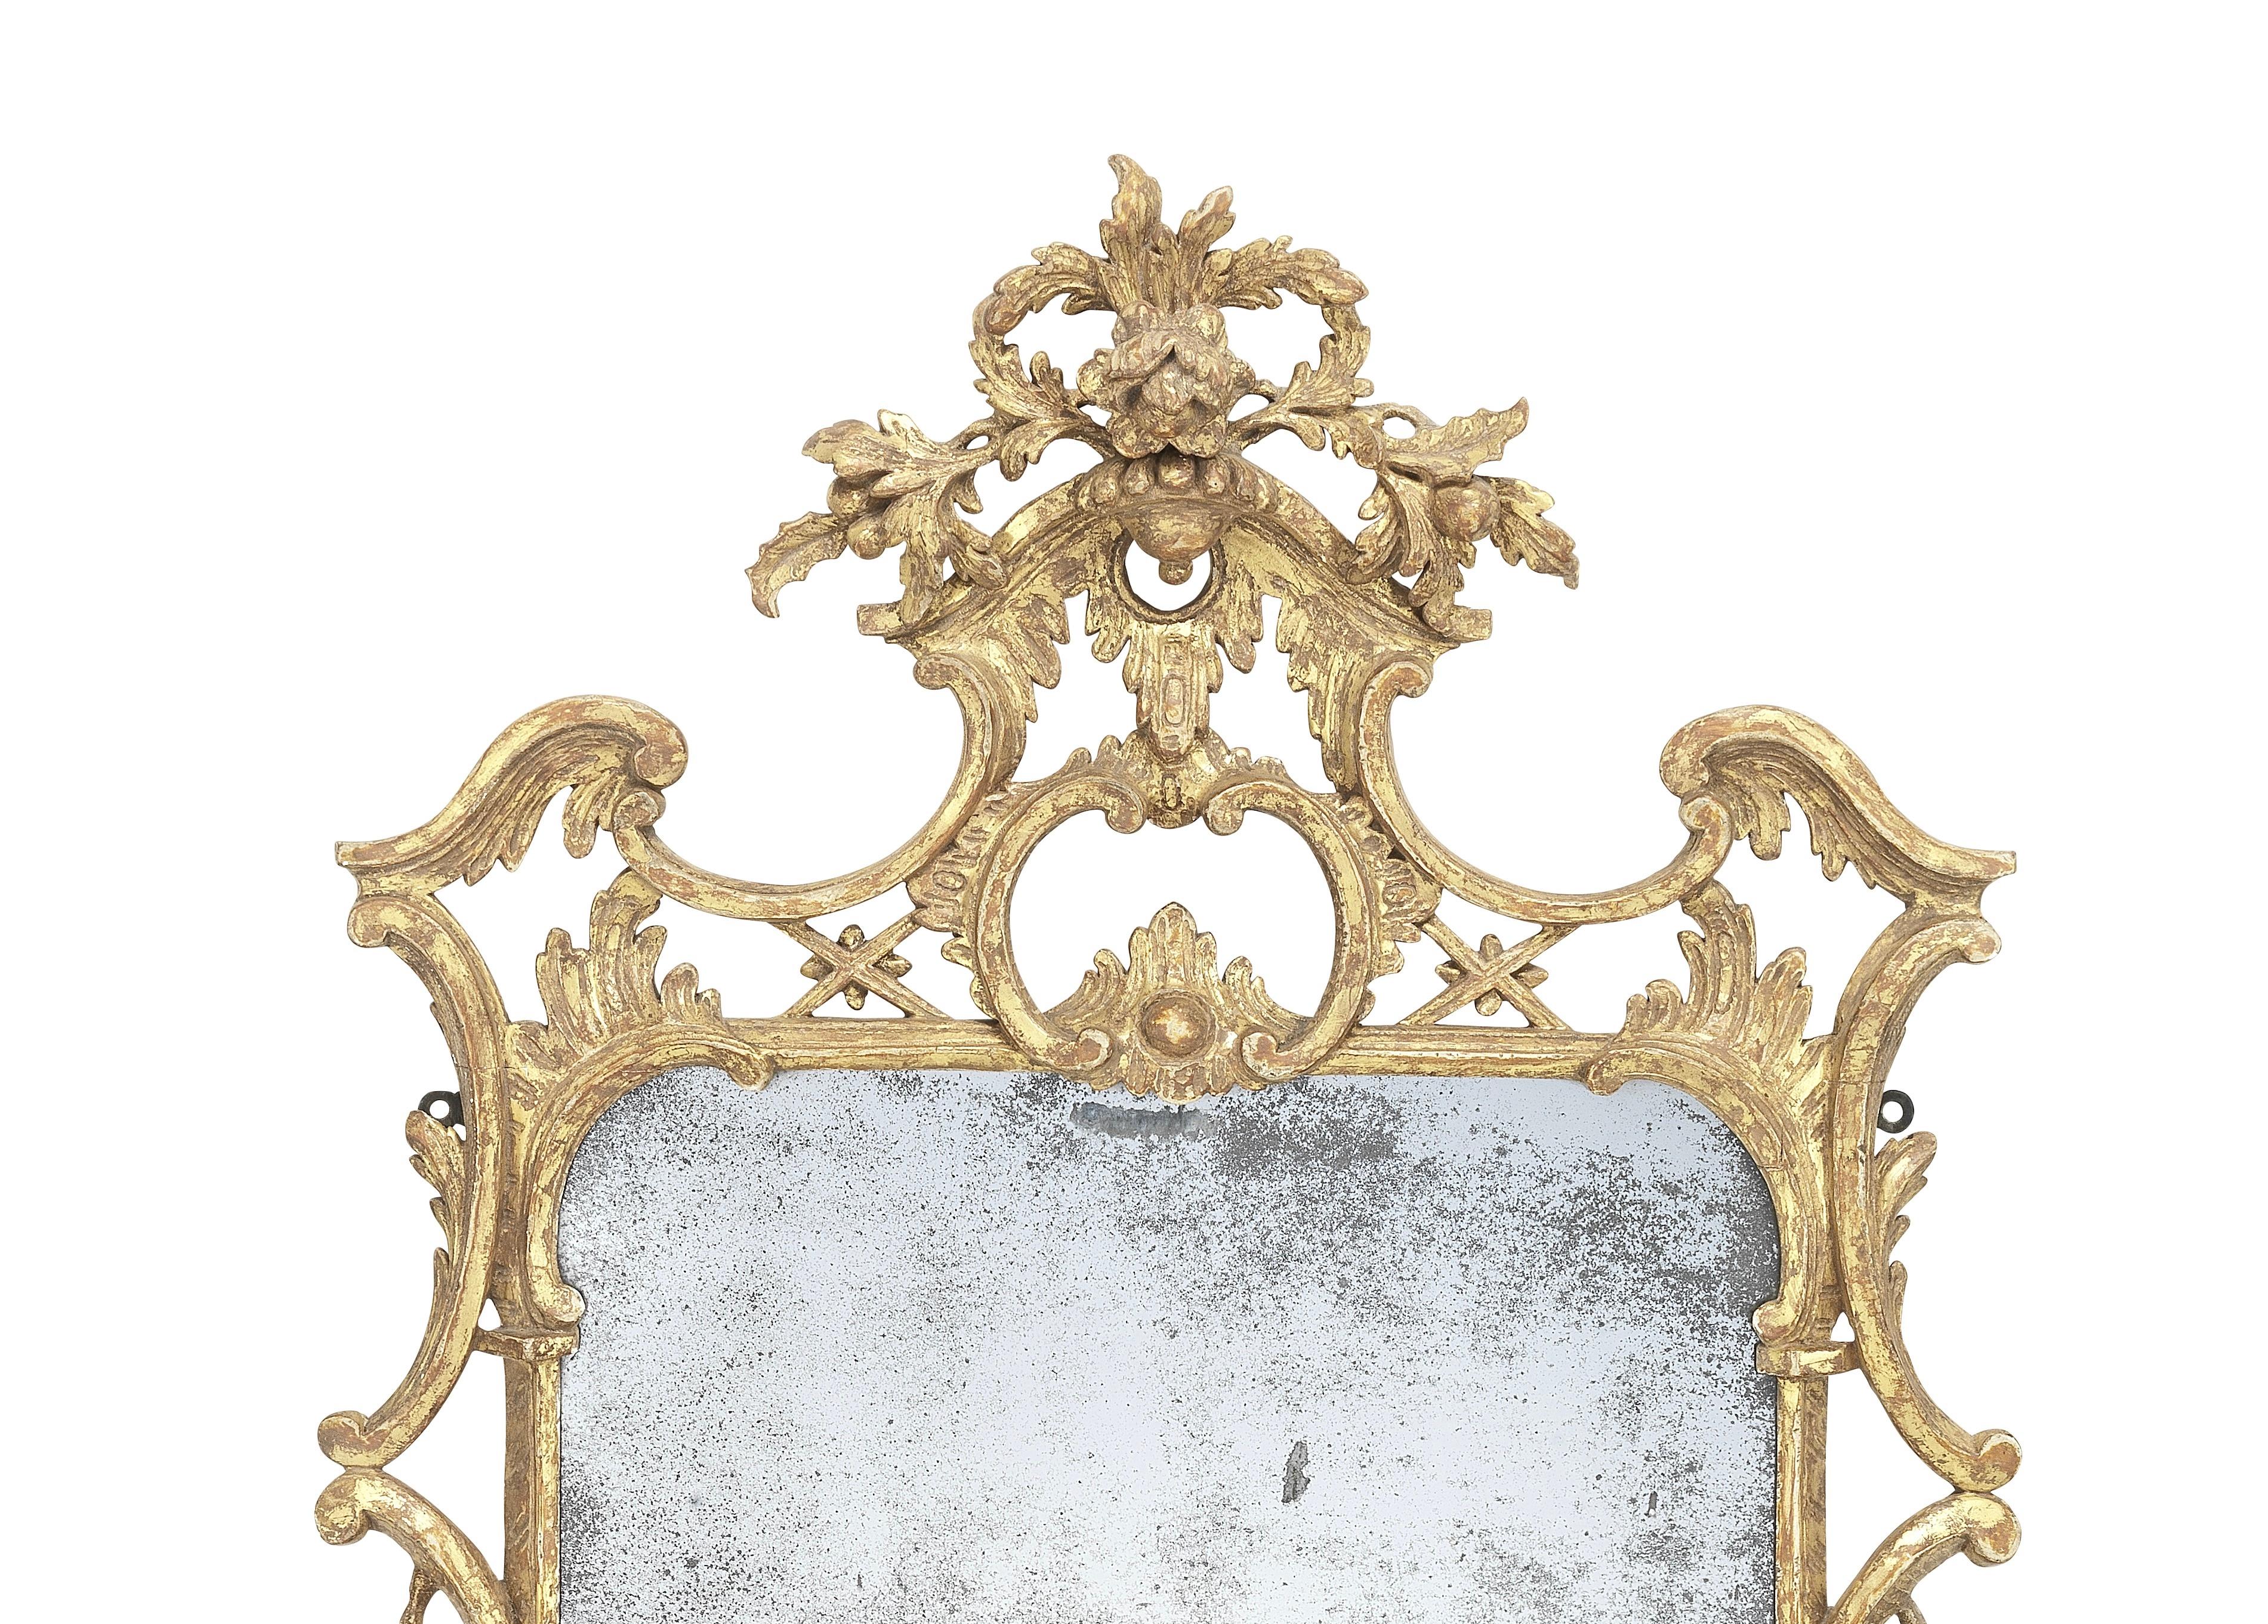 An early George III carved giltwood mirror in the manner of Thomas Johnson, circa 1760.

The period mercury mirror plate within a moulded fluted frame is flanked by cascading native flora. The carved upper C-scroll corners are pierced and